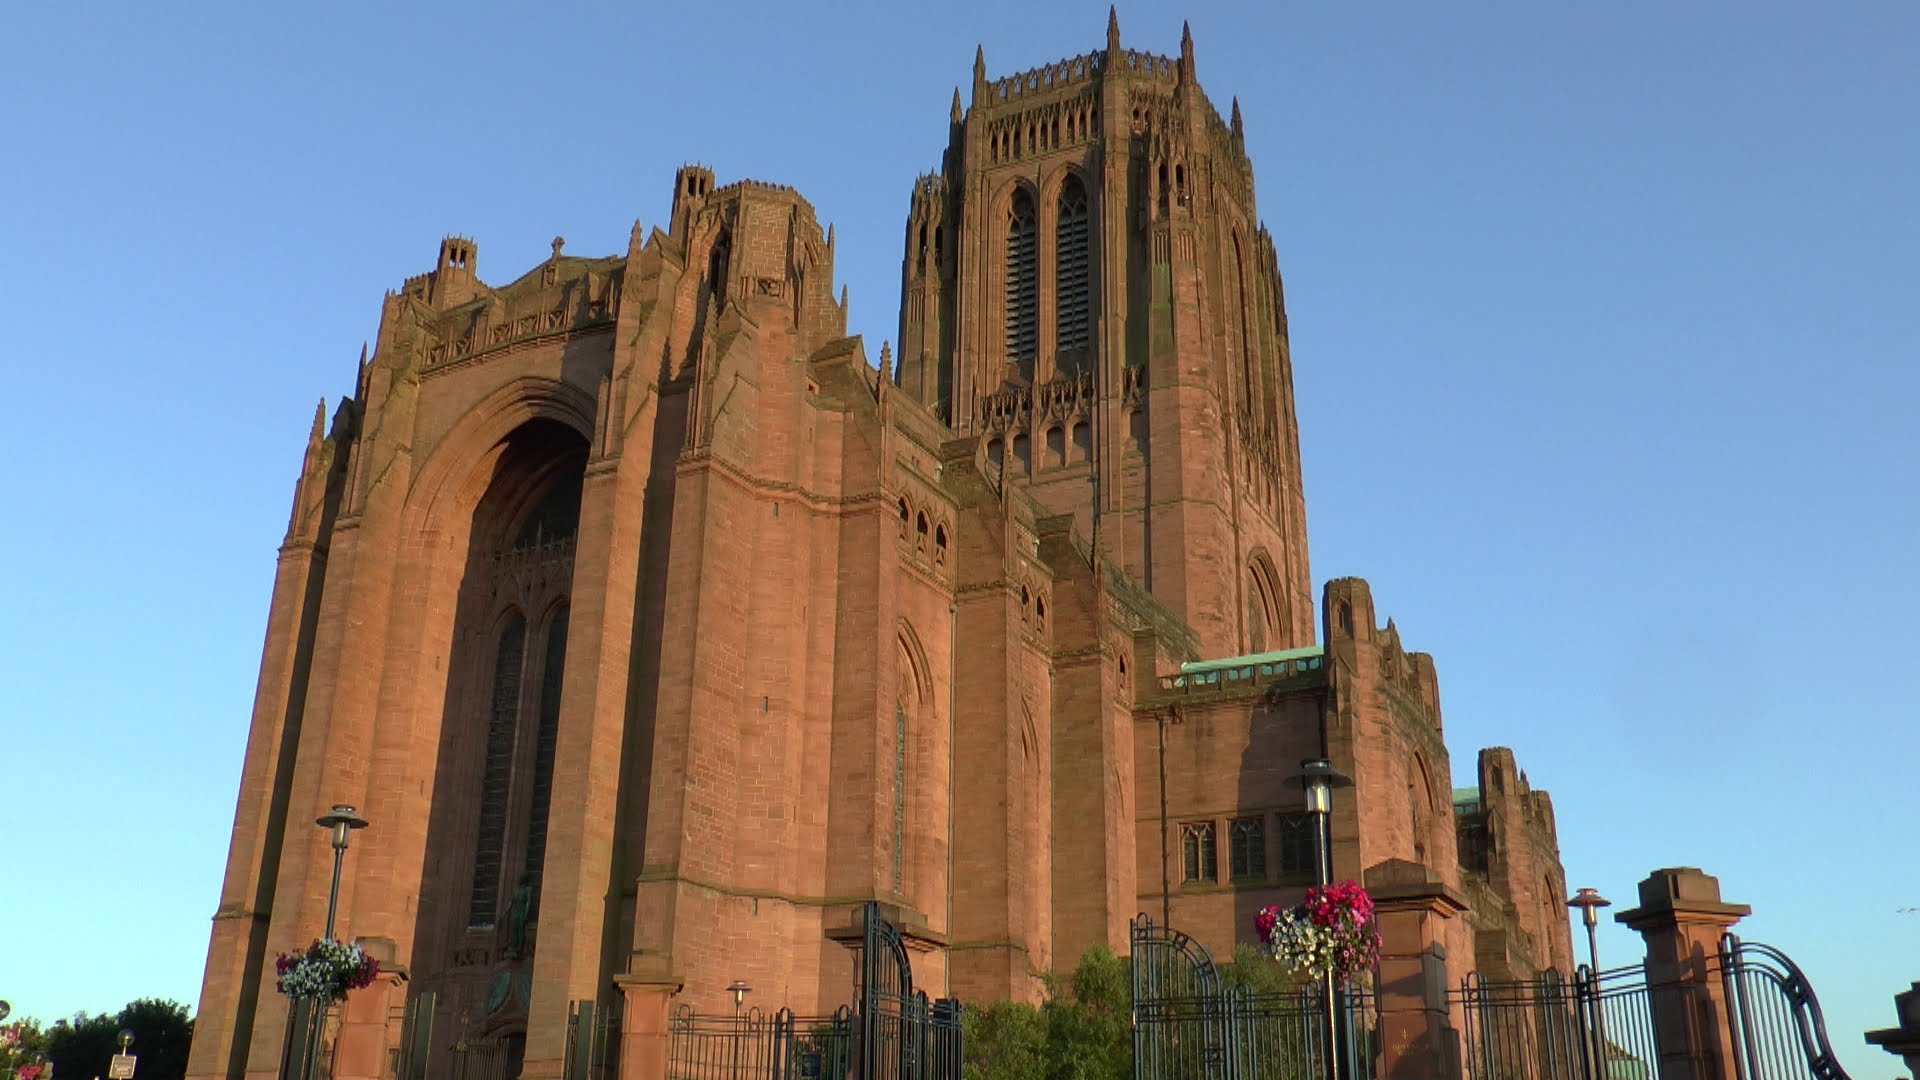 Twilight Tower - Liverpool Cathedral - YouTube